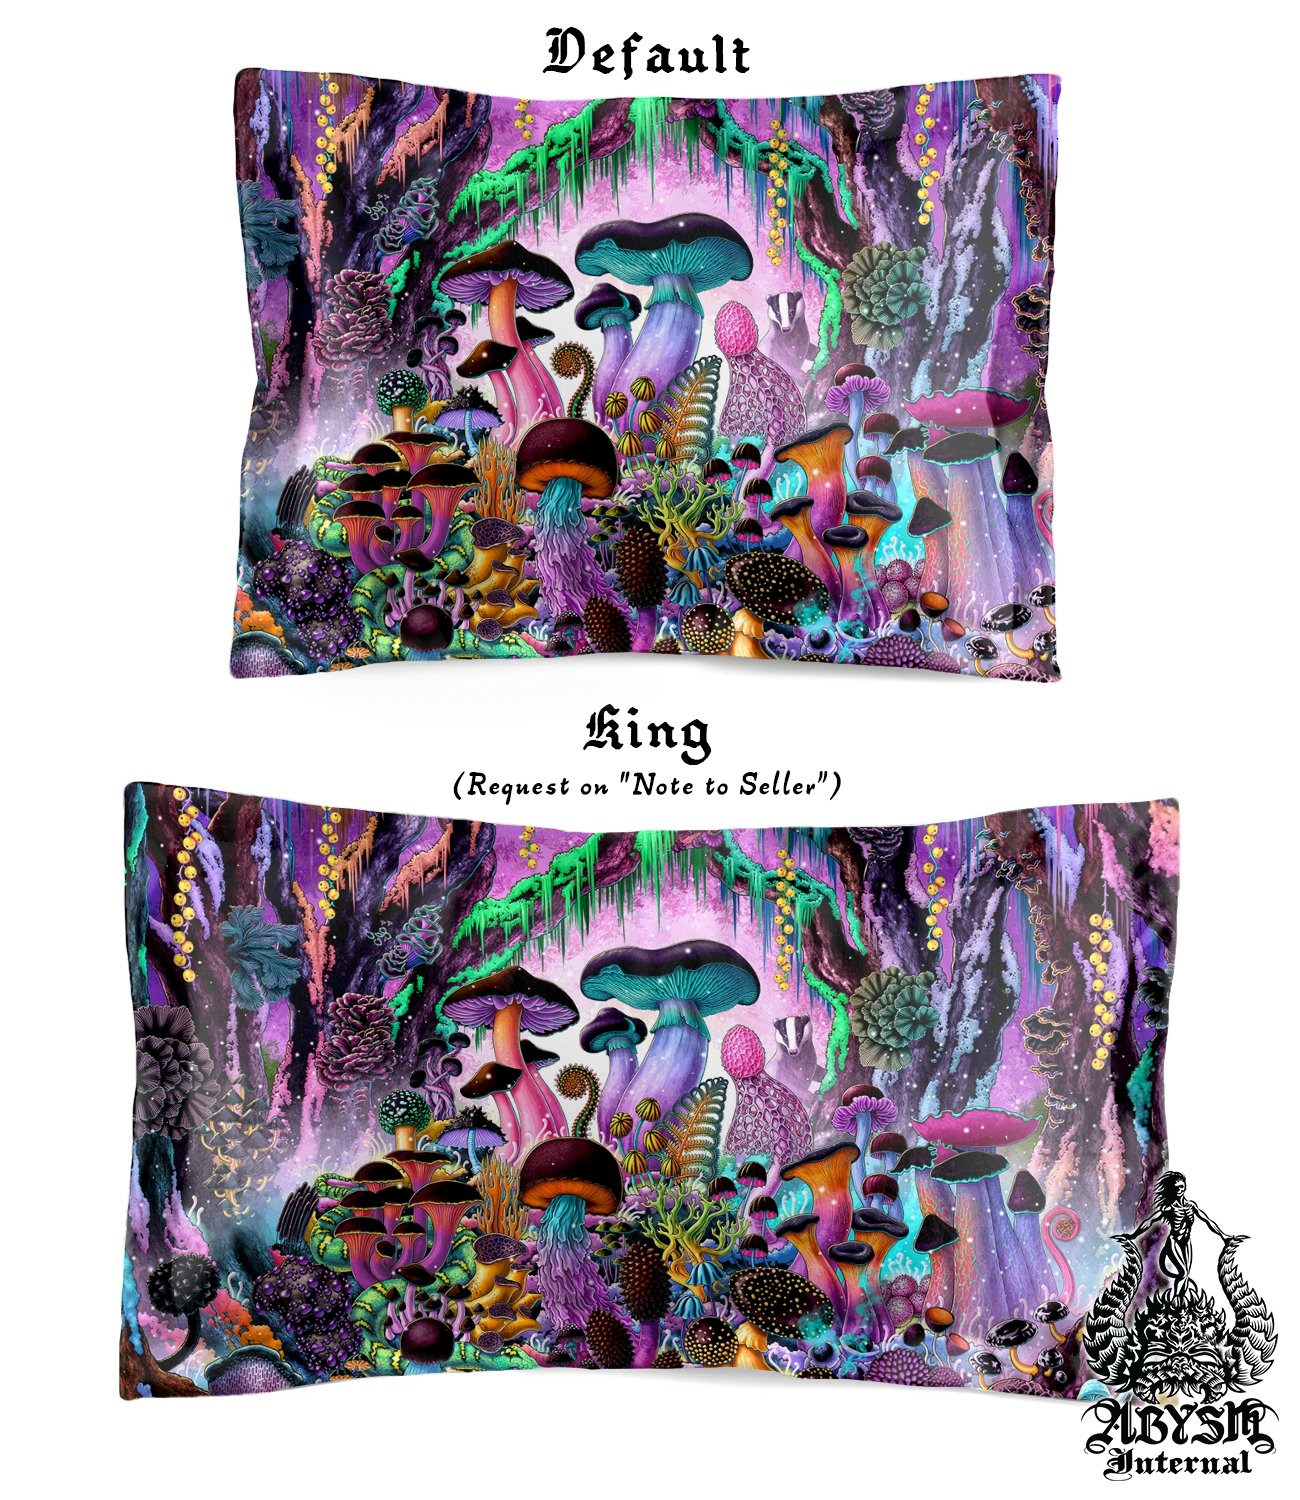 Mushrooms Bedding Set, Comforter and Duvet, Kids Fantasy Bed Cover, Psychedelic Bedroom Decor, King, Queen and Twin Size - Magic Shrooms, Aesthetic Pastel Black - Abysm Internal